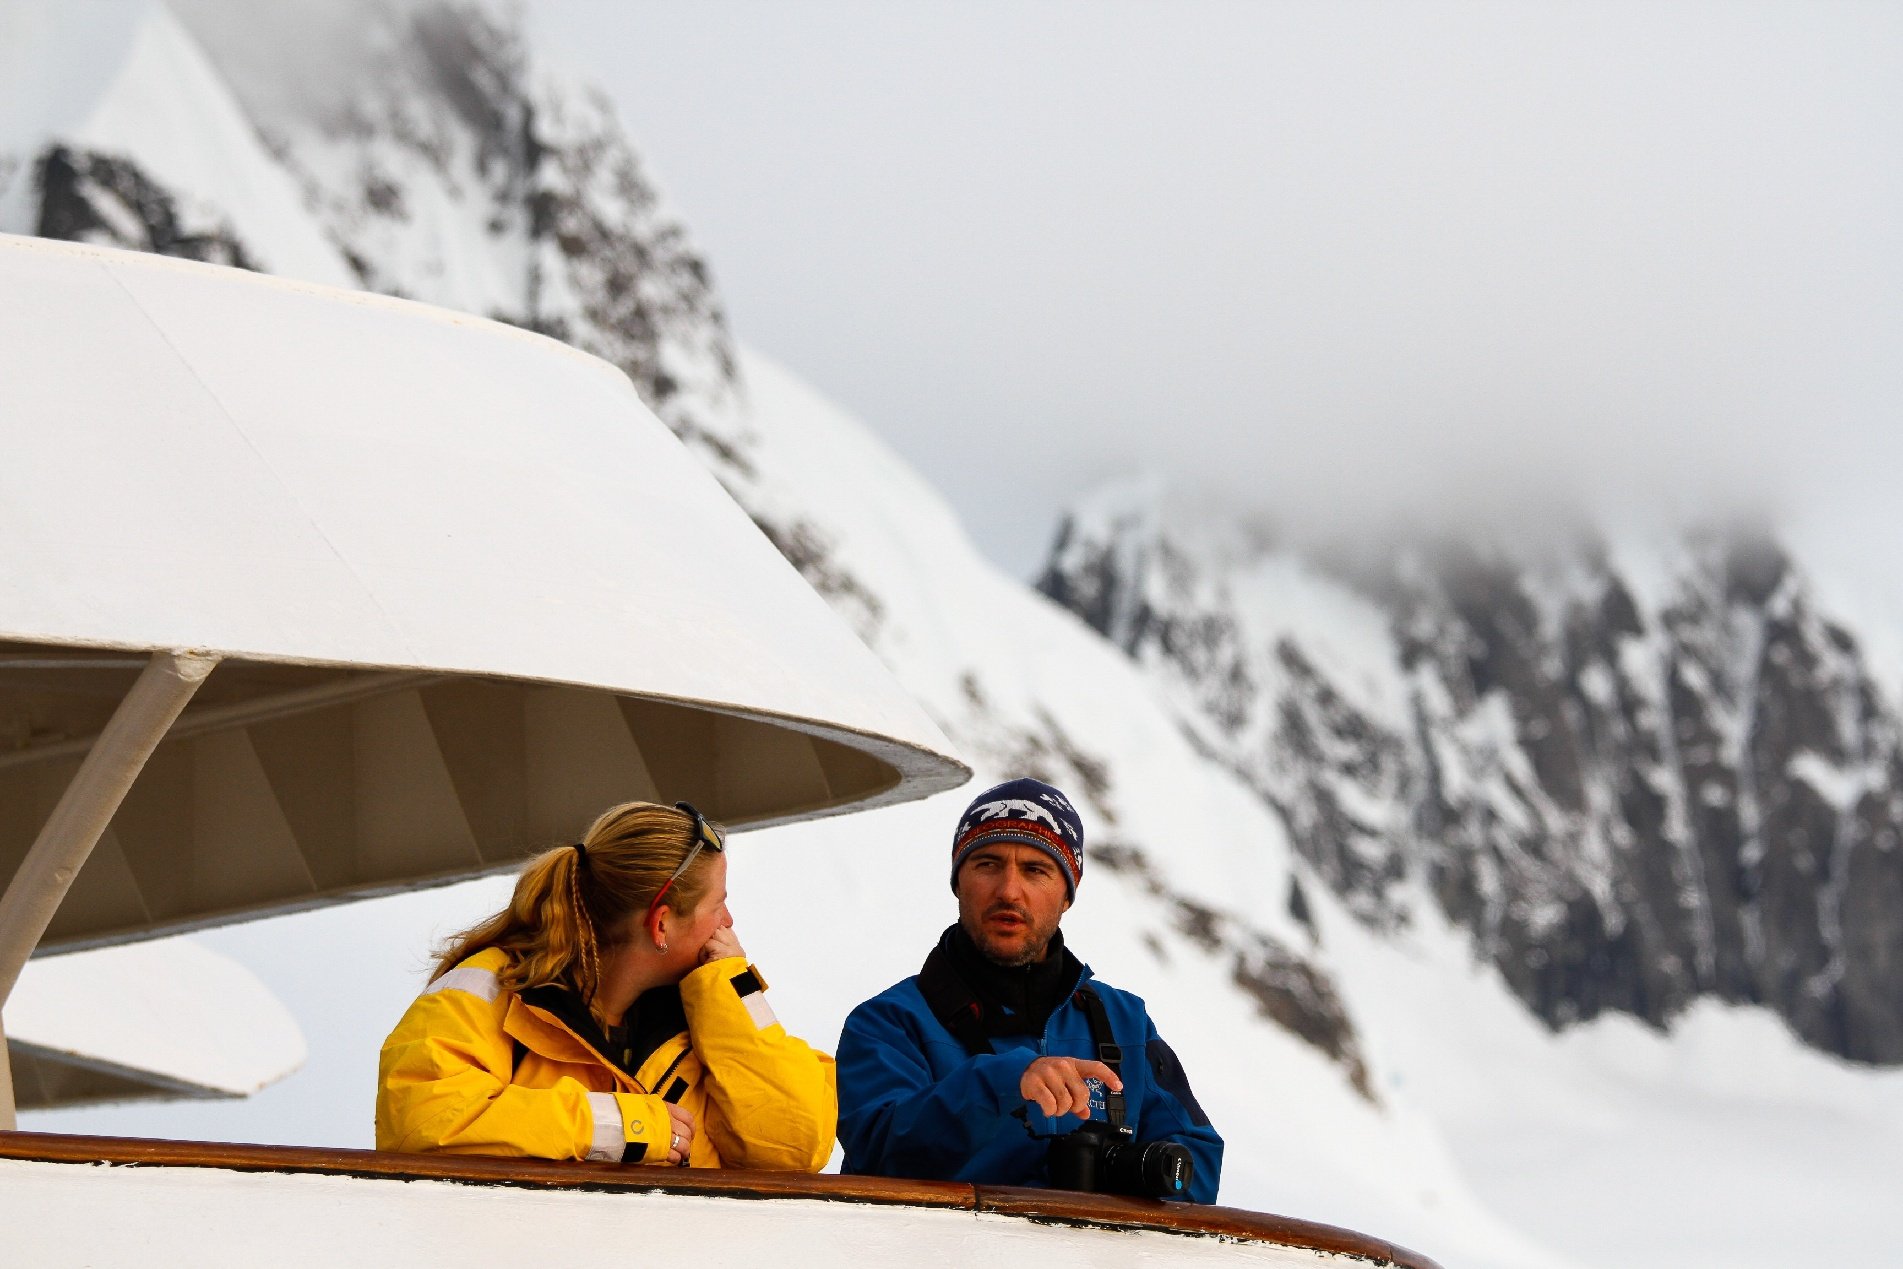 Experienced expedition guides are with you every step of the way to help interpret the sights and sounds of the polar regions.